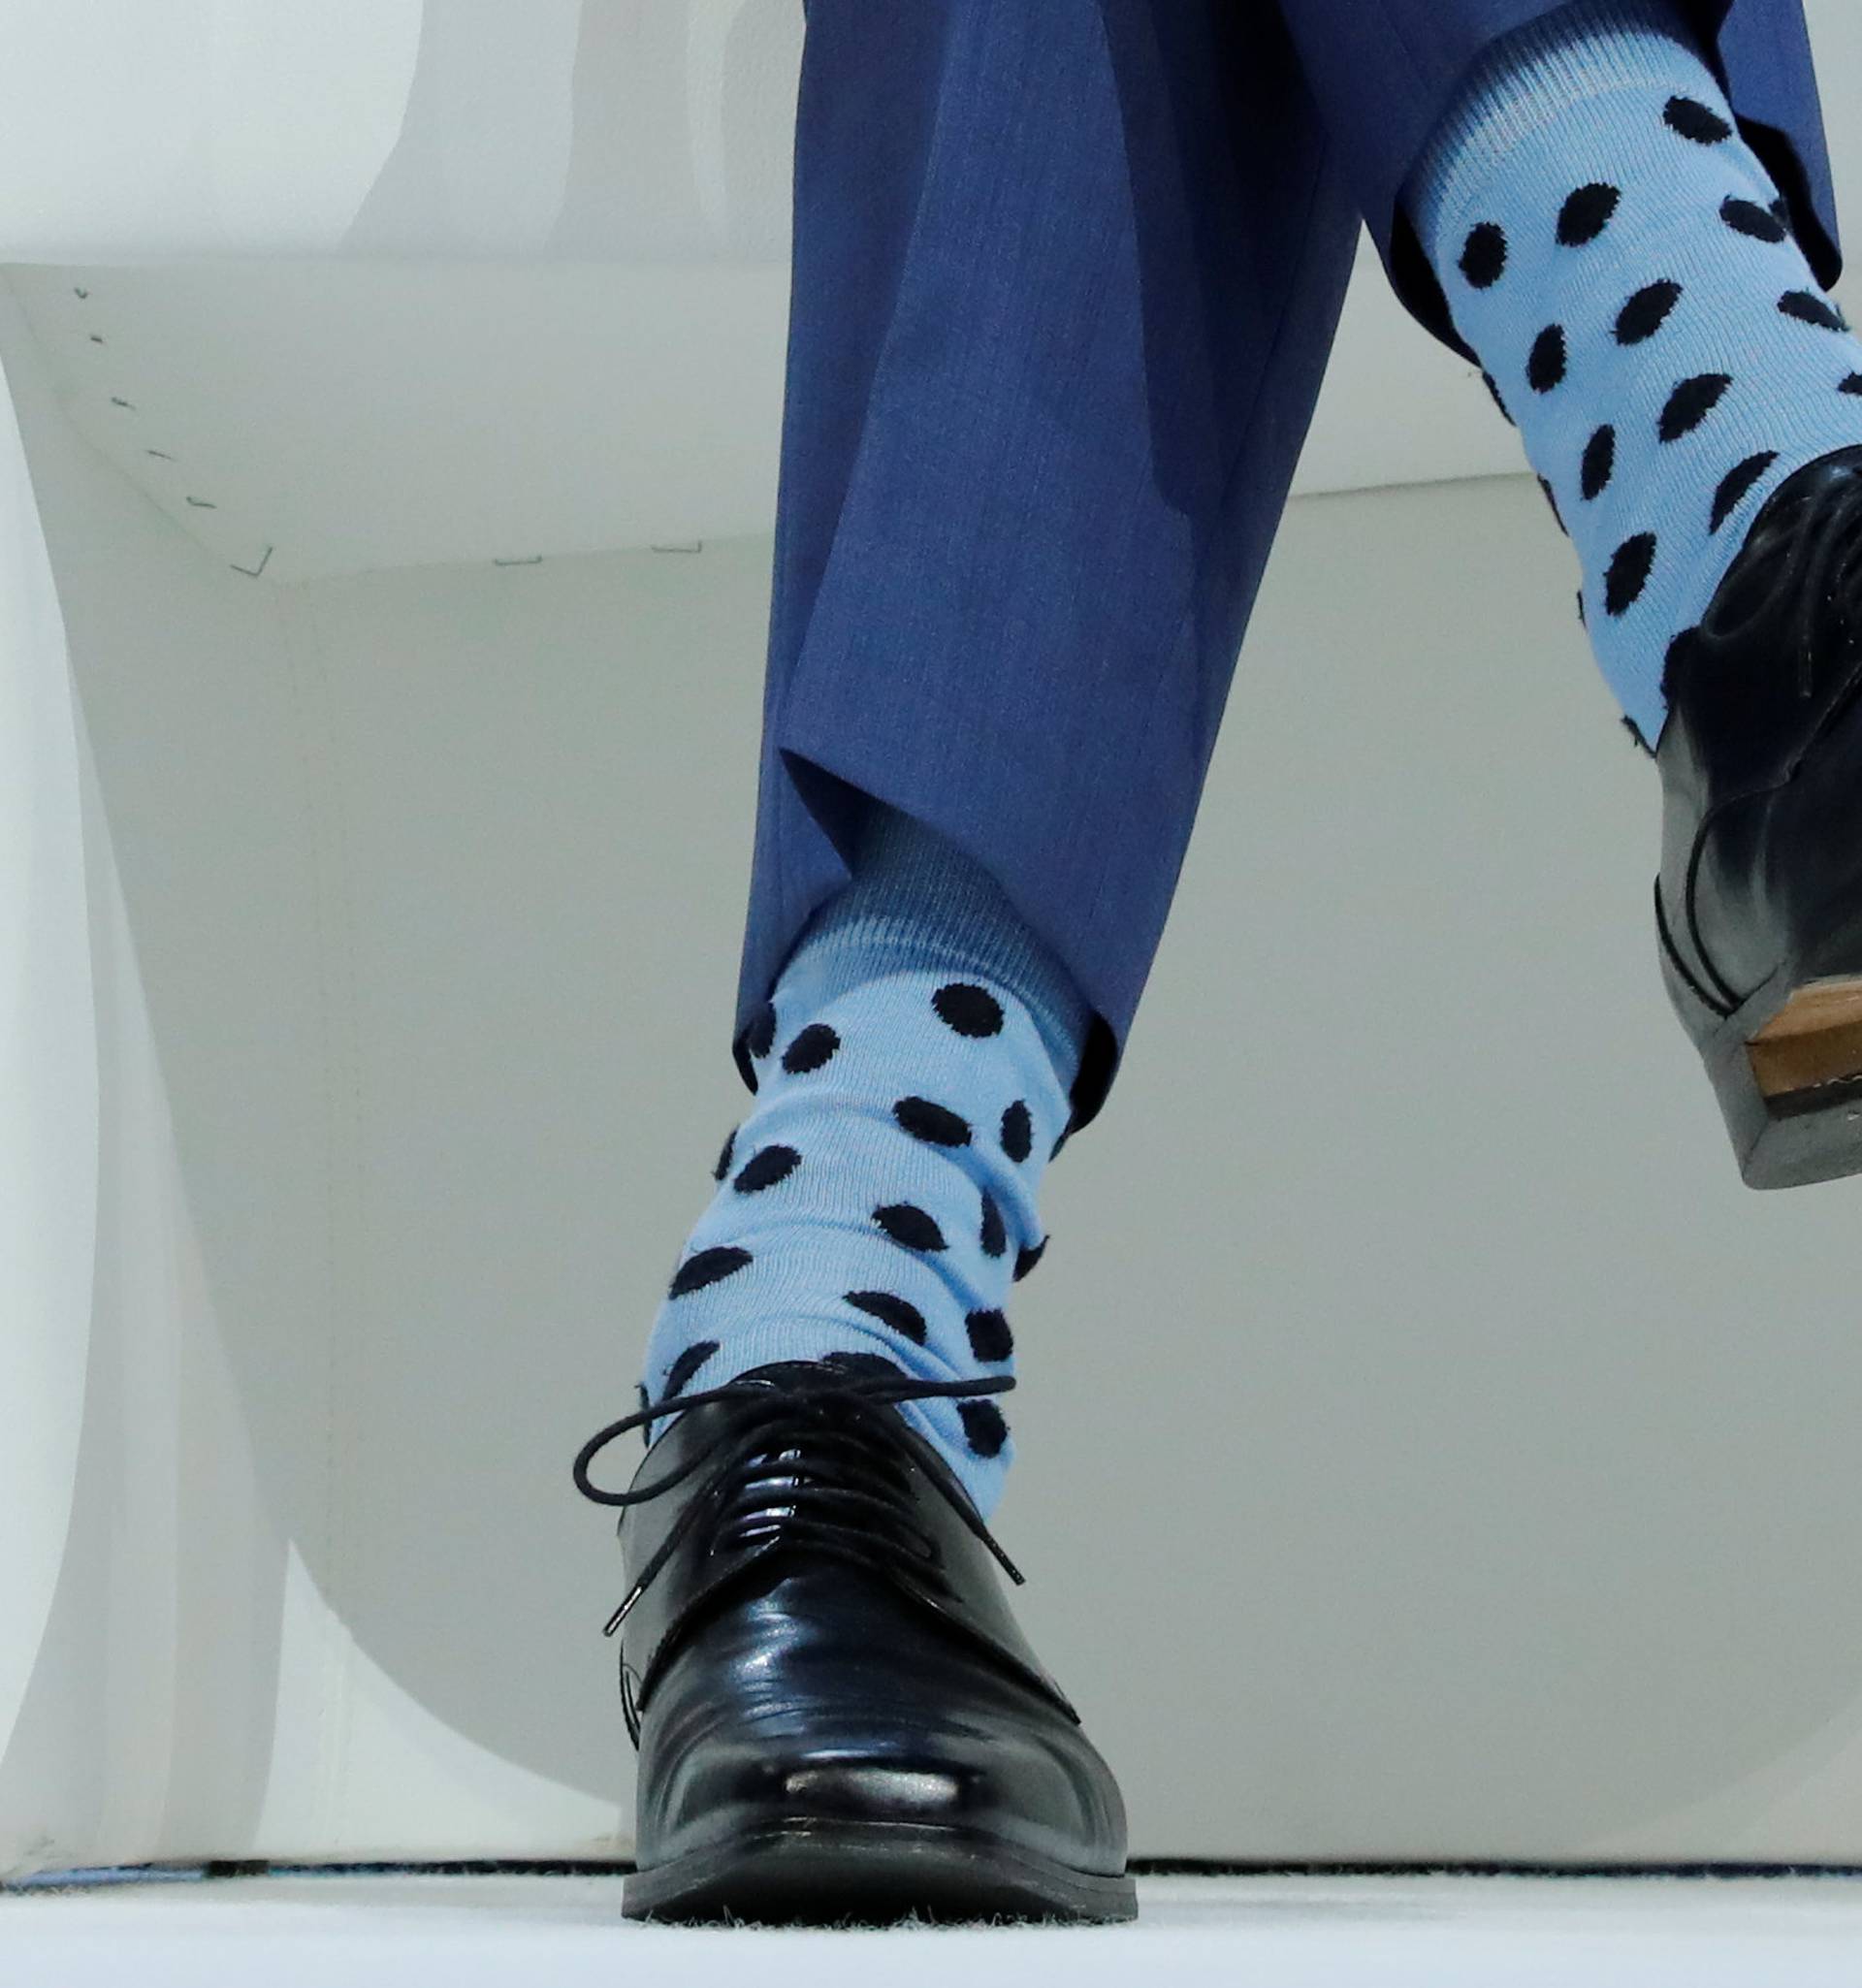 Canadian Prime Minister's Justin Trudeau's socks are seen as he attends the World Economic Forum (WEF) annual meeting in Davos